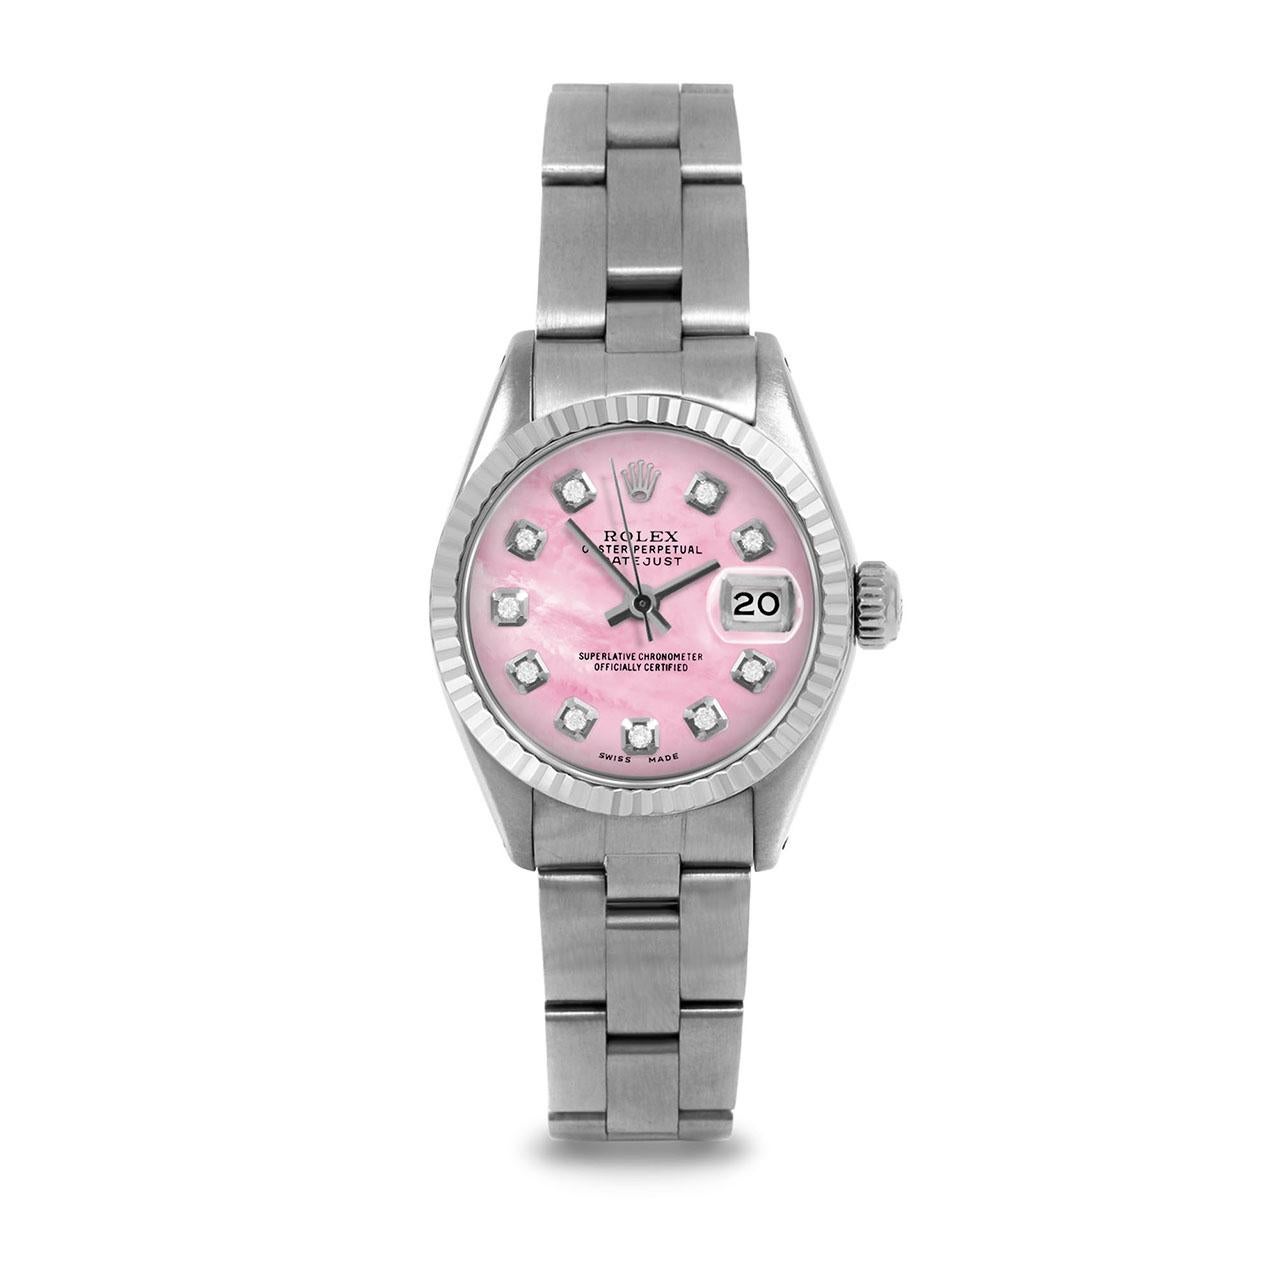 Pre-Owned Rolex 6917 Ladies 26mm Datejust Watch, Custom Pink Mother of Pearl Diamond Dial & Fluted Bezel on Rolex Stainless Steel Oyster Band.   

SKU 6917-SS-PMOP-DIA-AM-FLT-OYS


Brand/Model:        Rolex Datejust
Model Number:        6917
Style: 